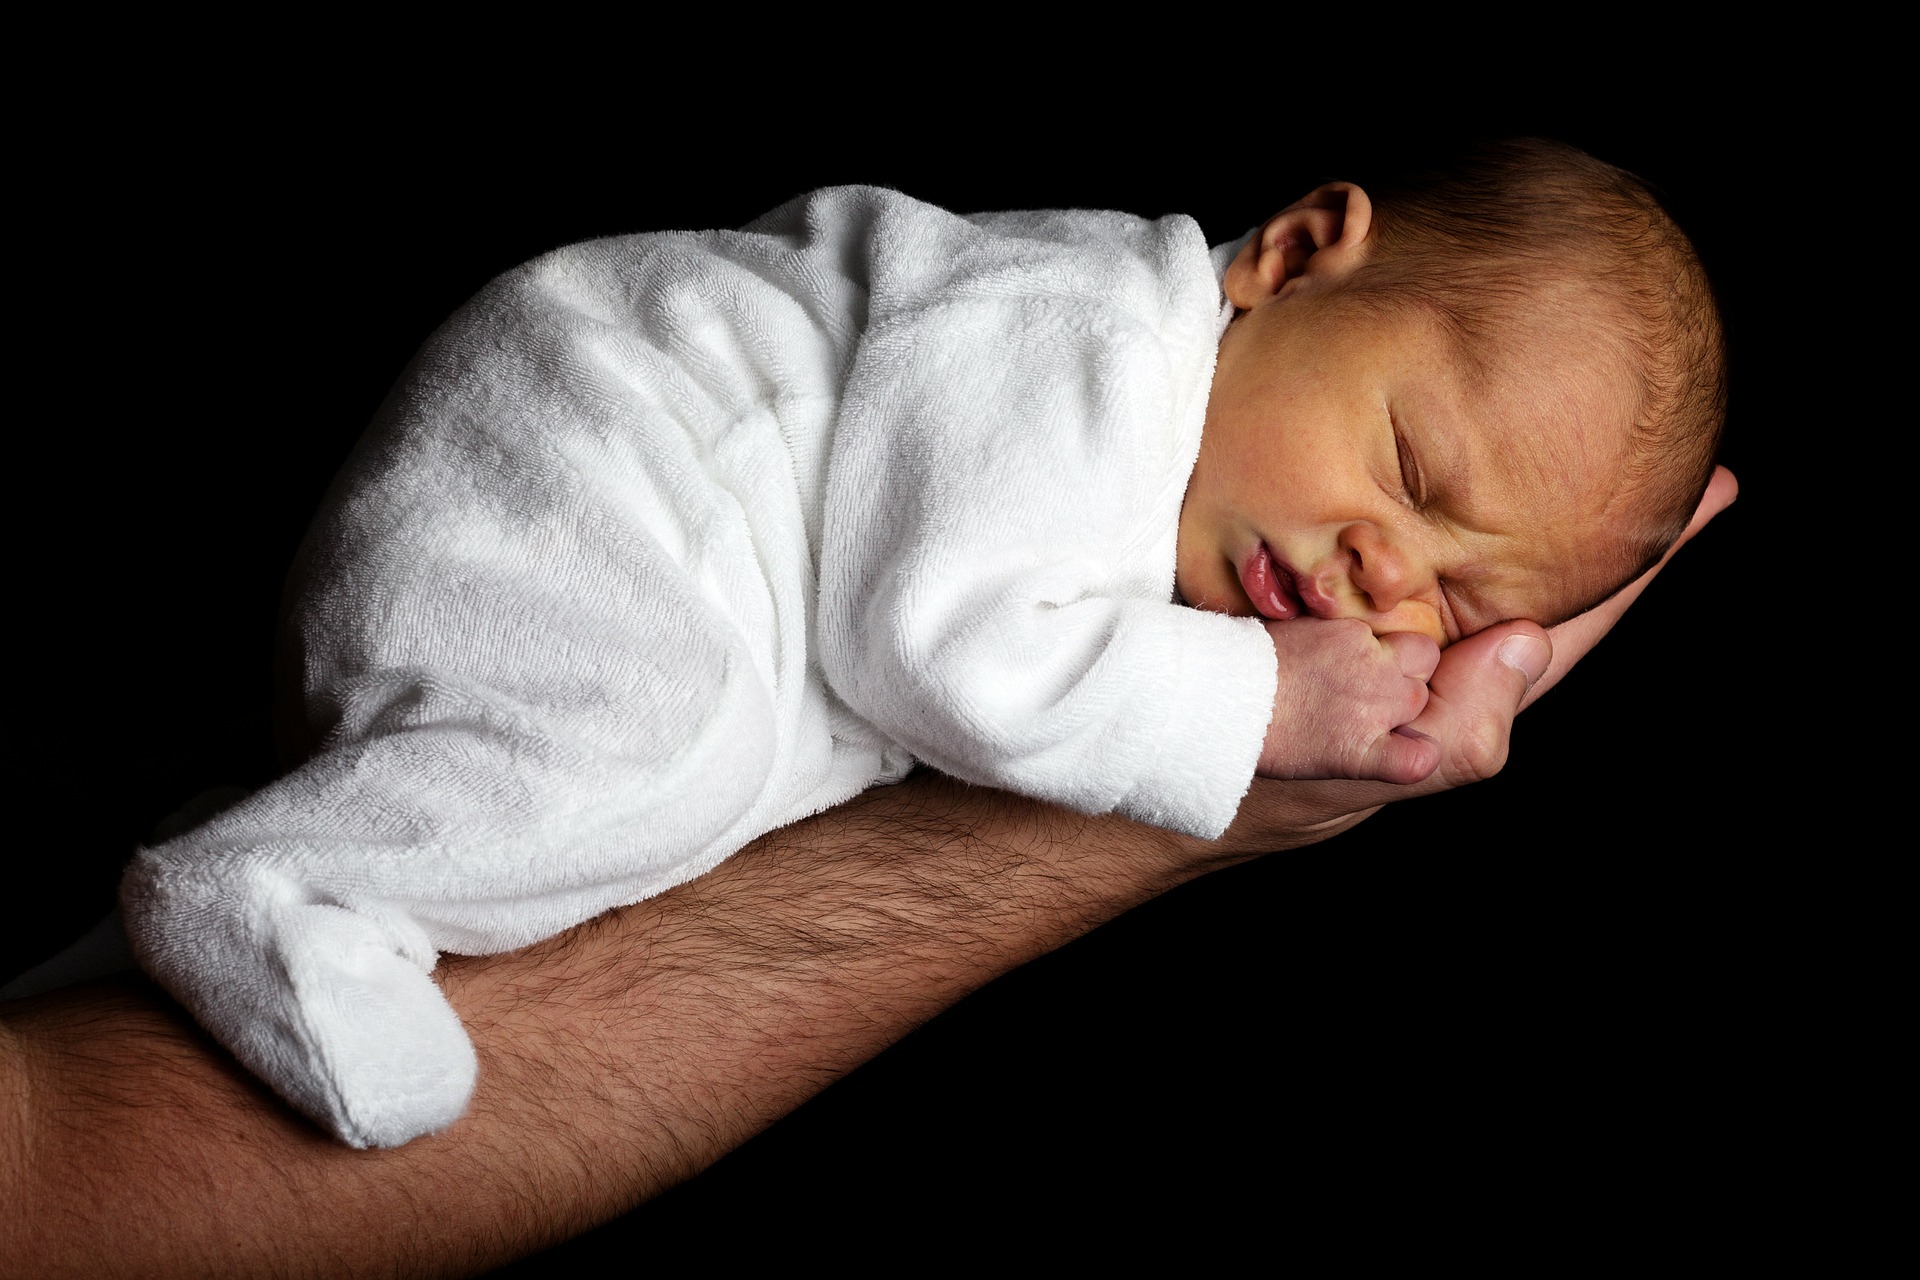 baby in white dress sleeping on a man's forearm